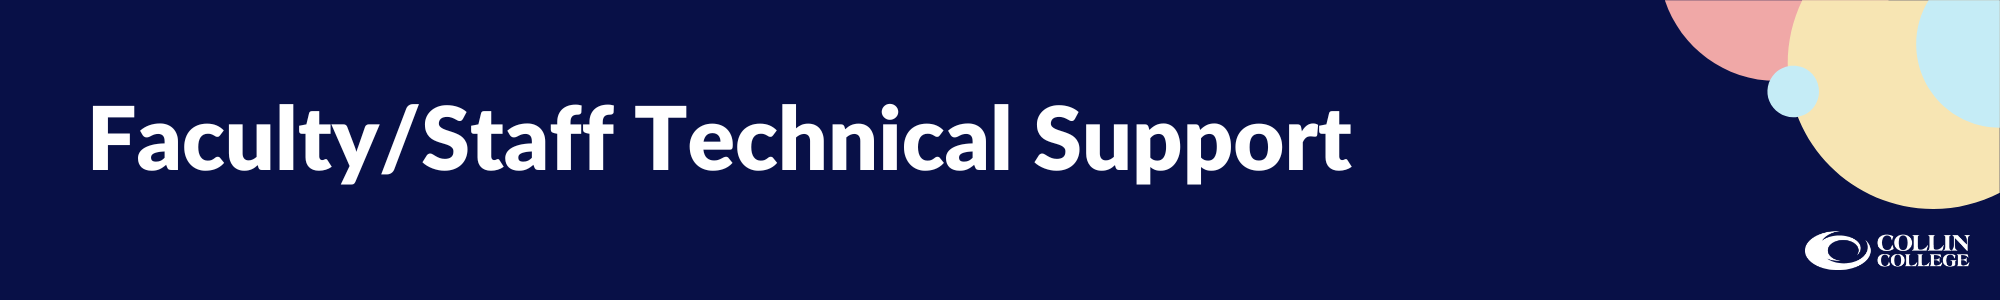 Faculty/Staff Technical Support